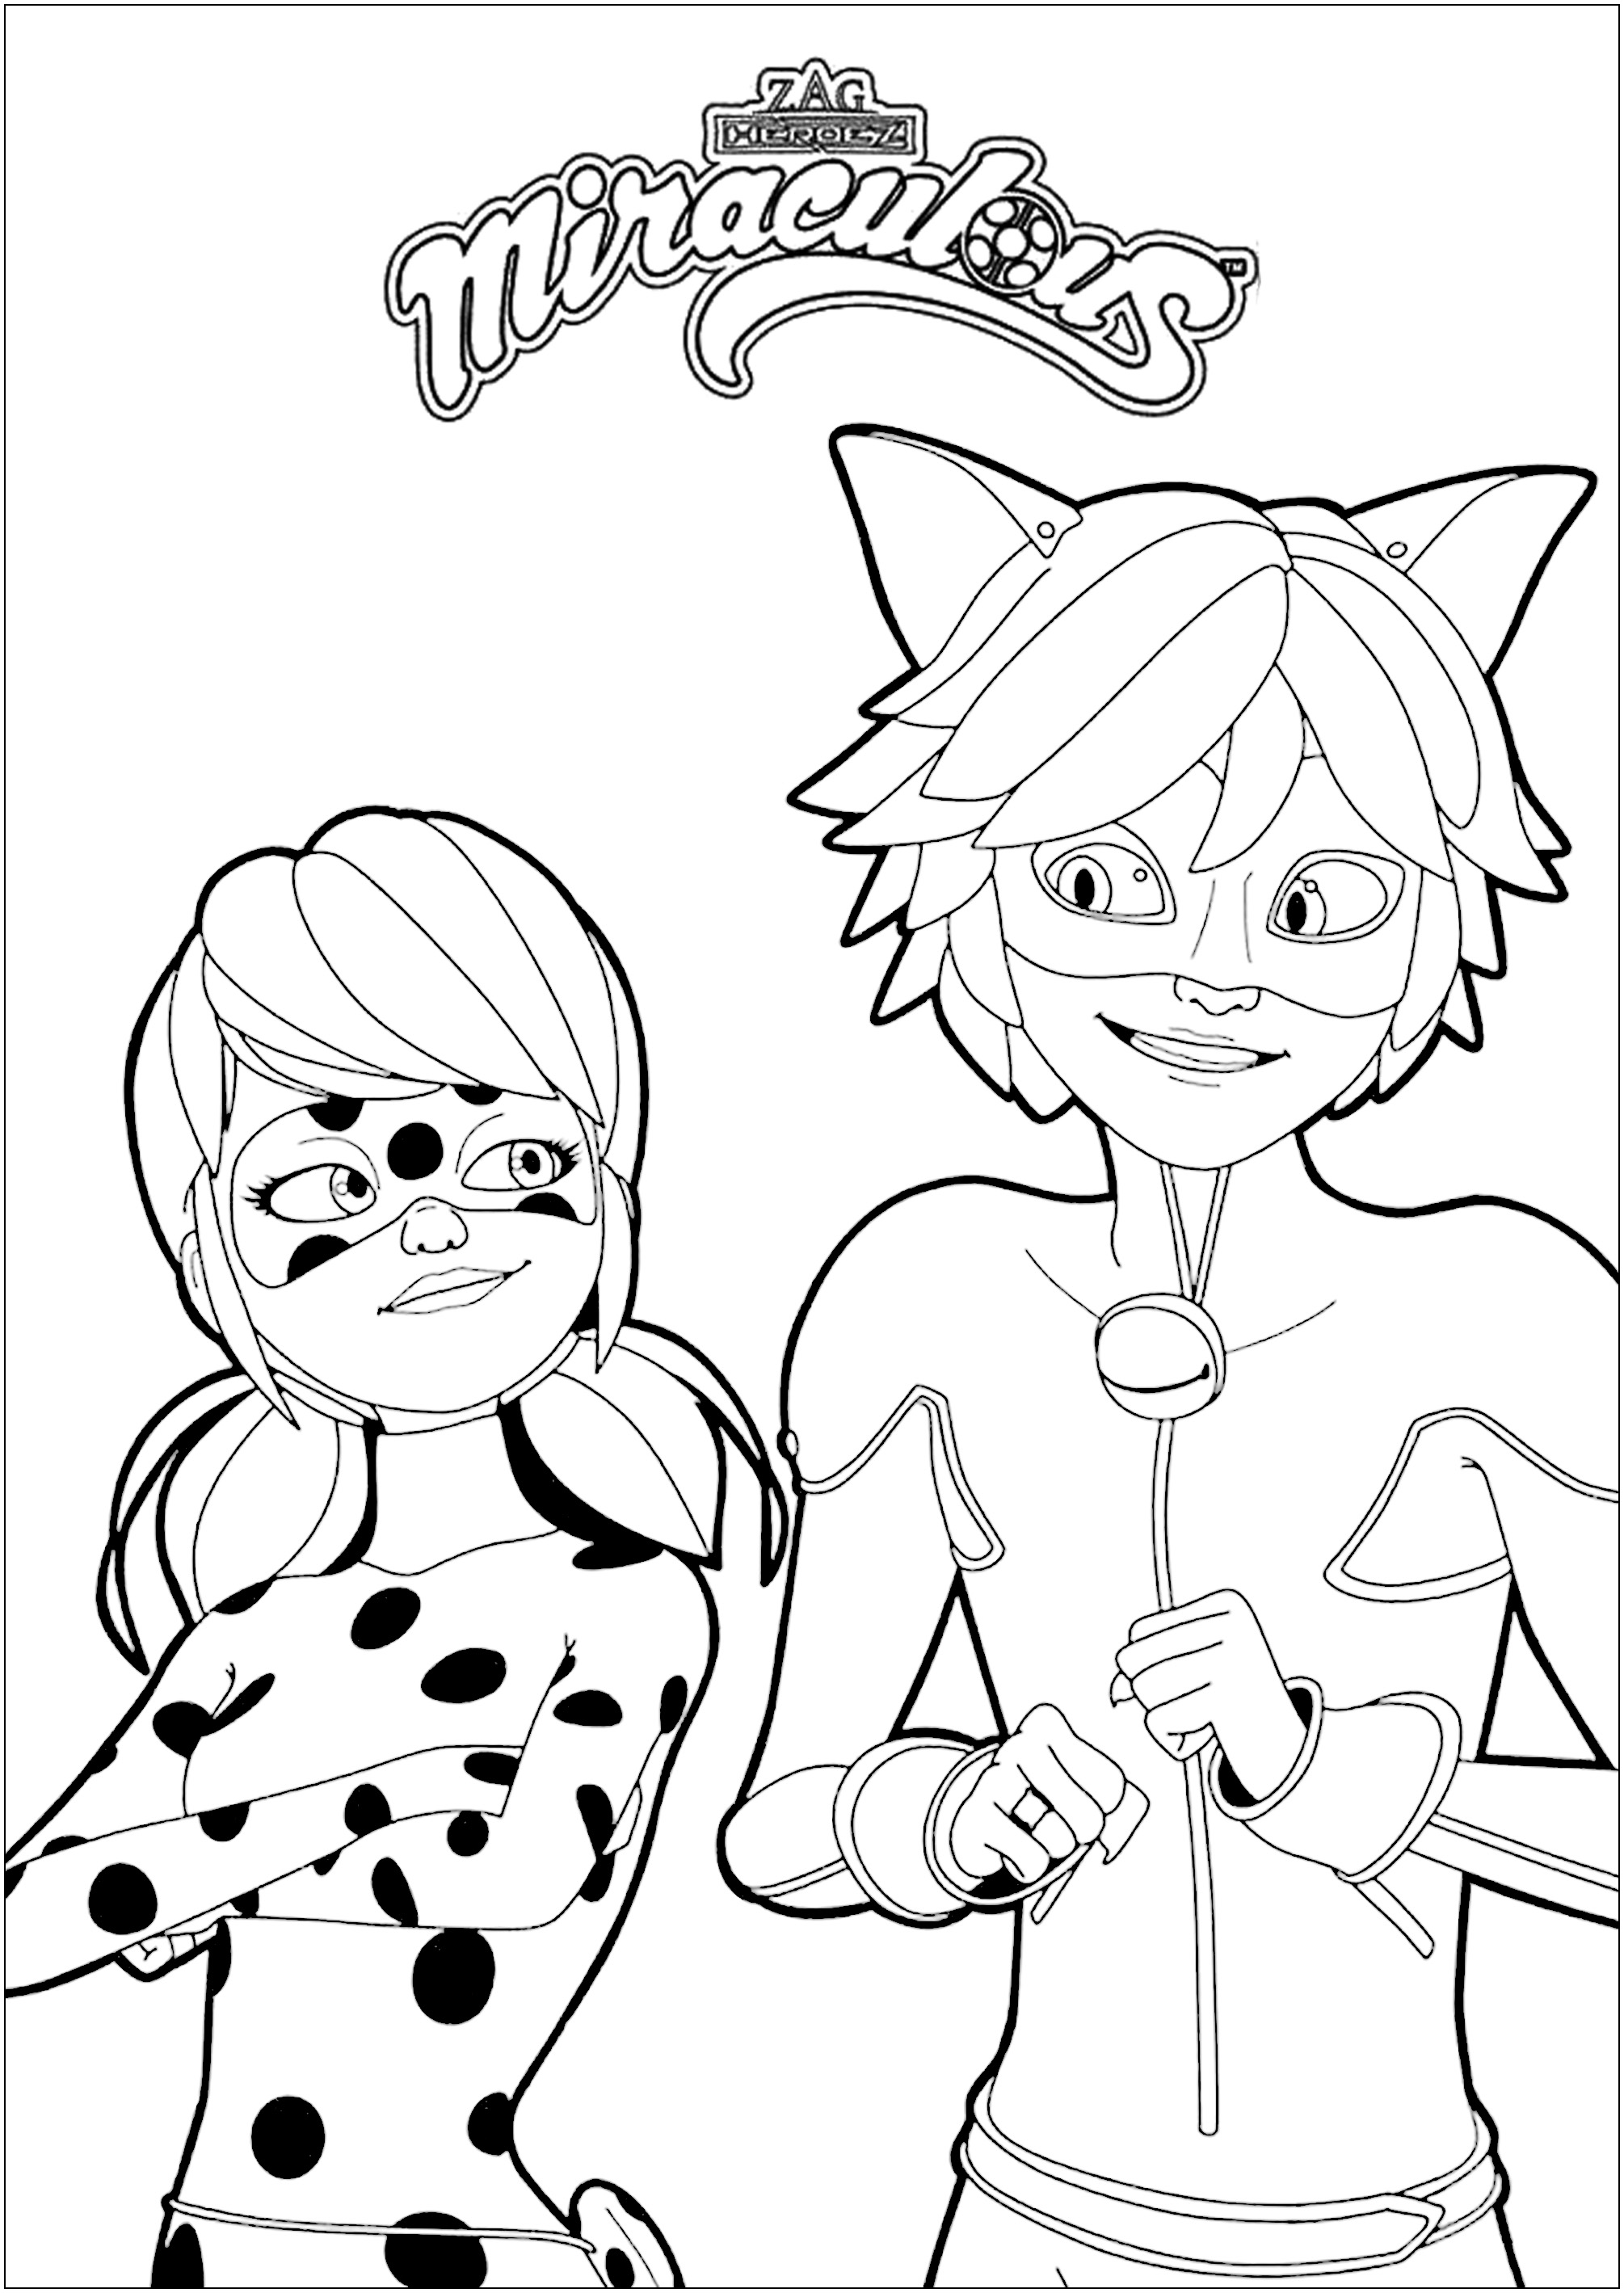 Lady bug / Miraculous : coloring pages for children - Miraculous ...